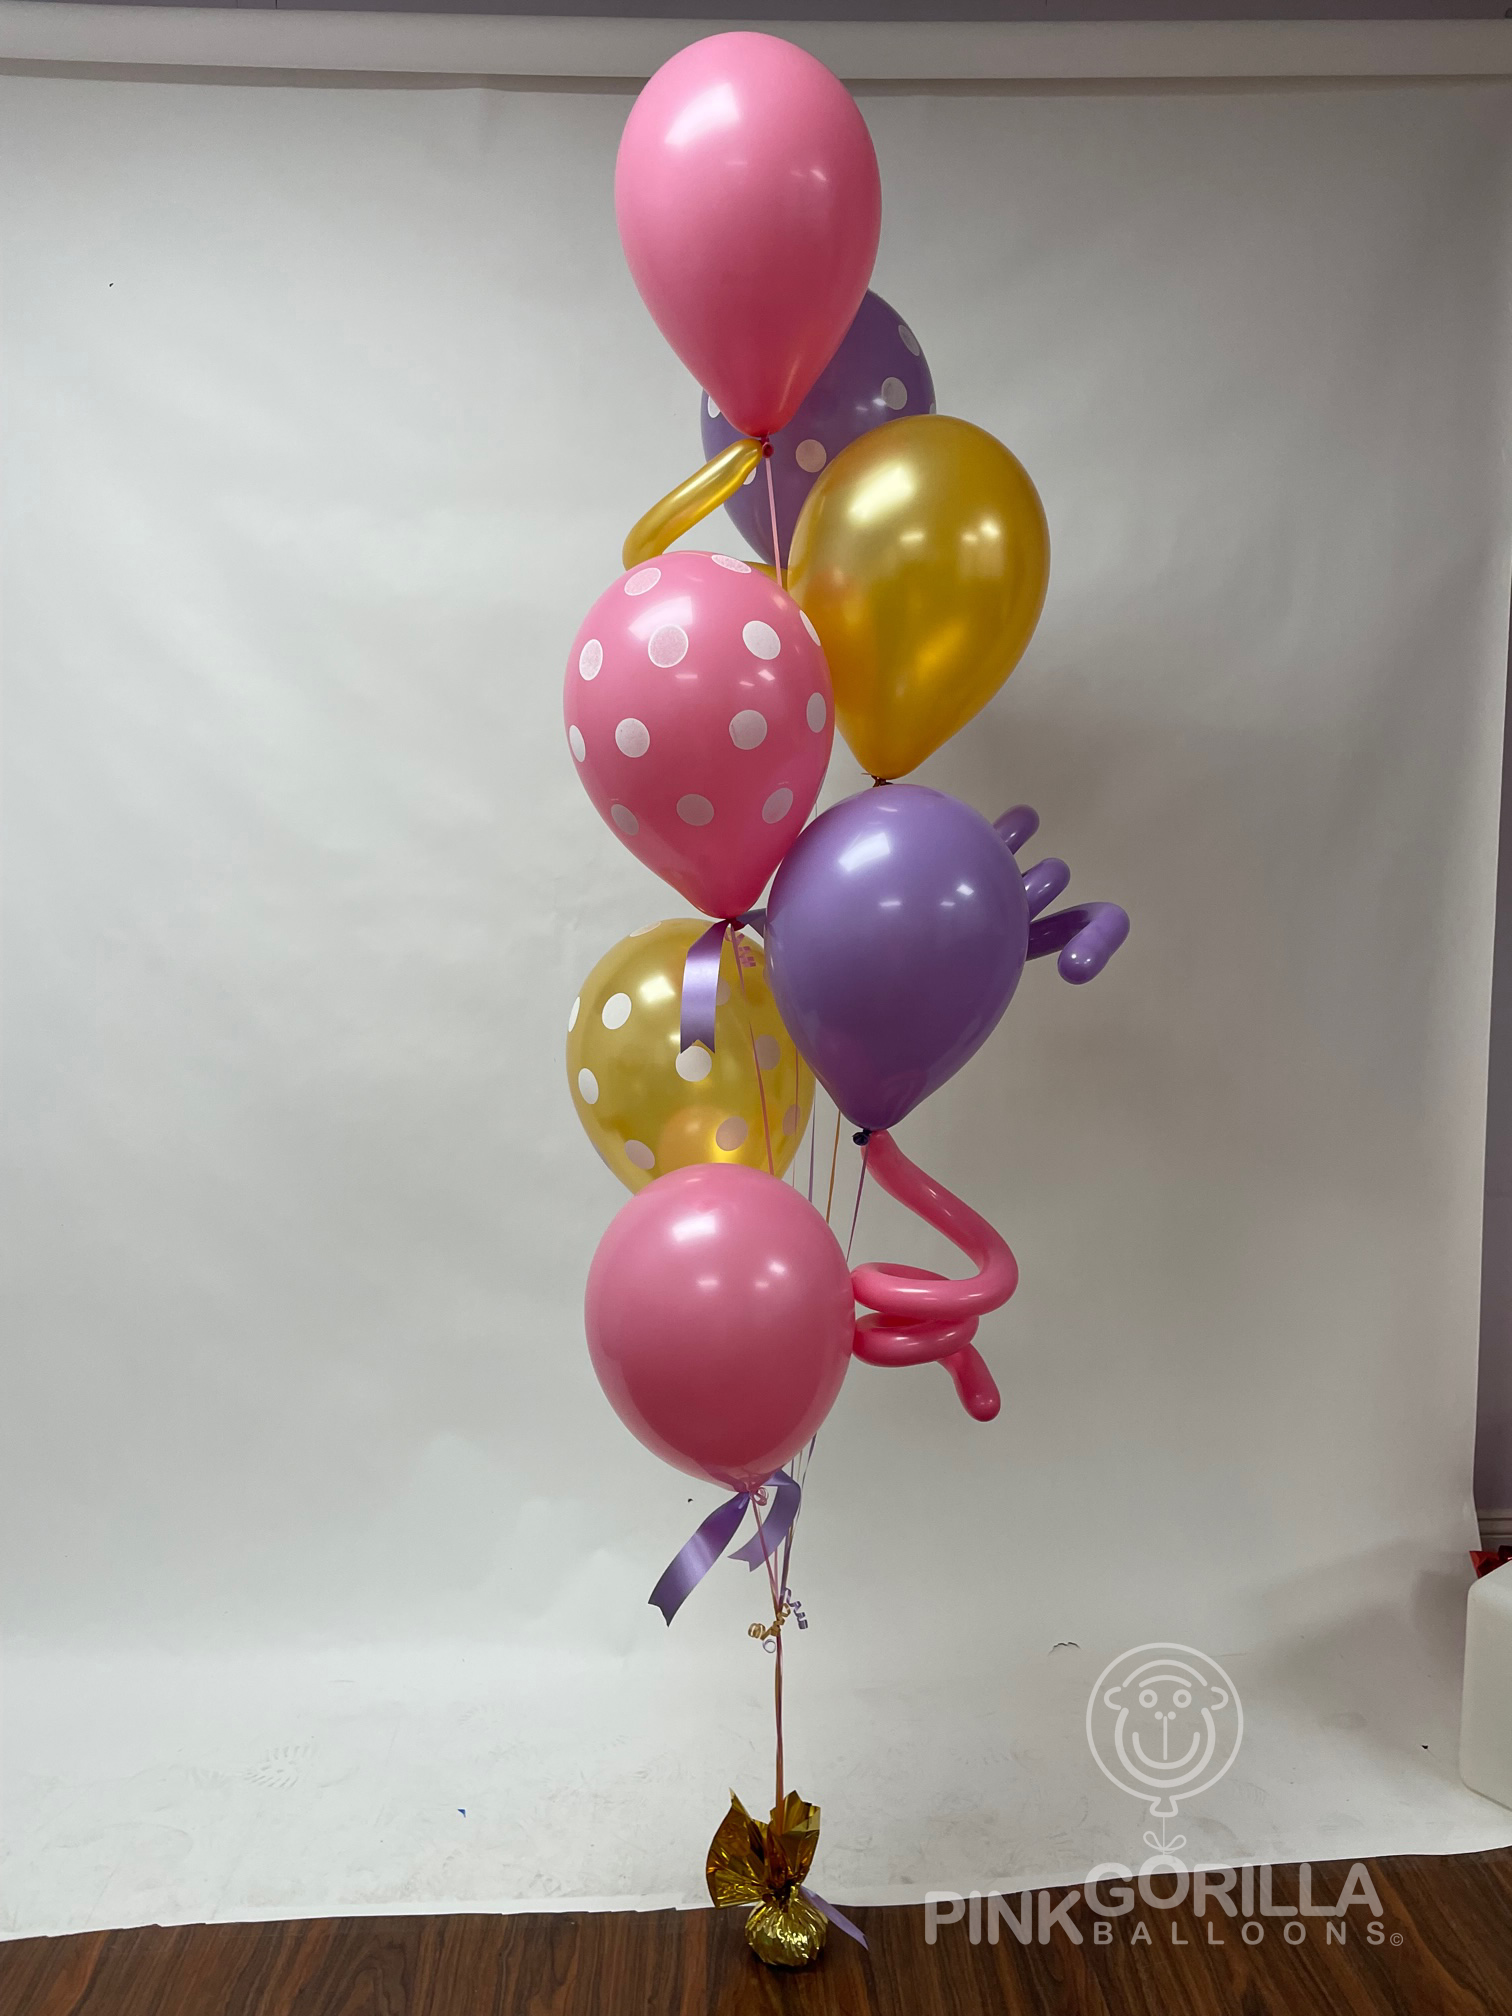 bouquet-7 11 inch latex balloons w squiggles